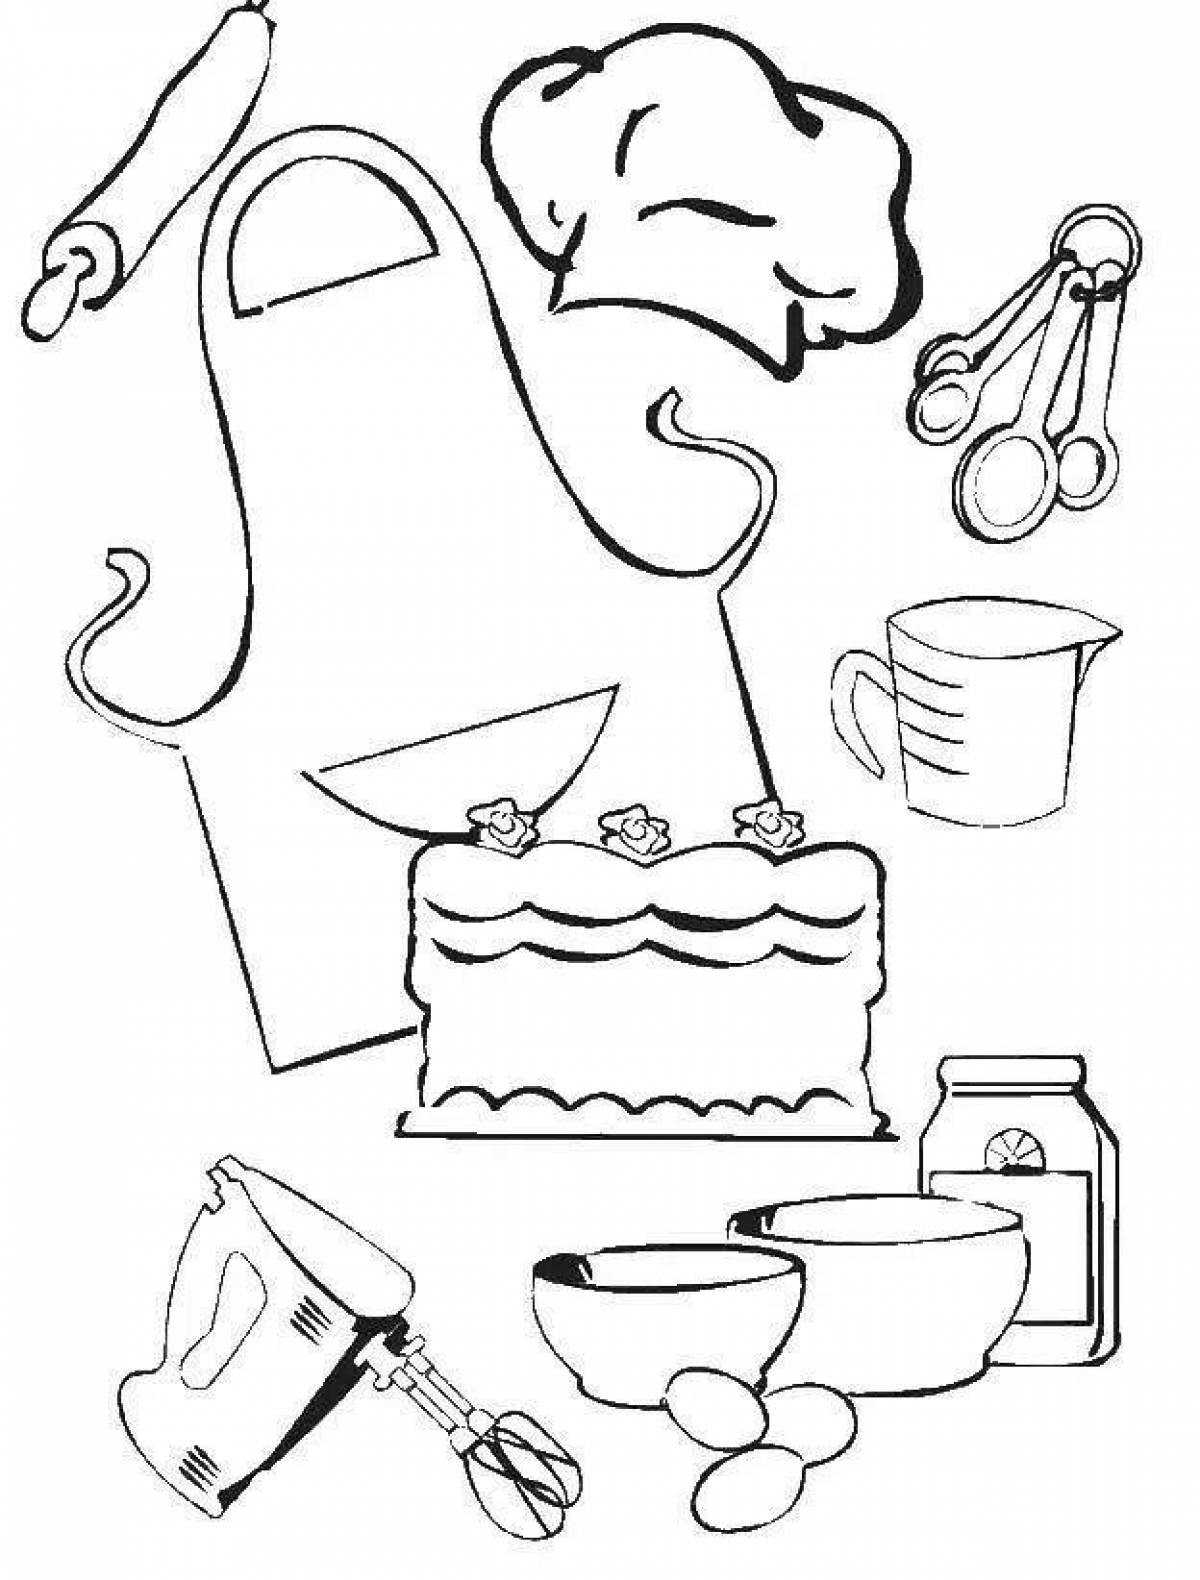 Fascinating pastry chef coloring book